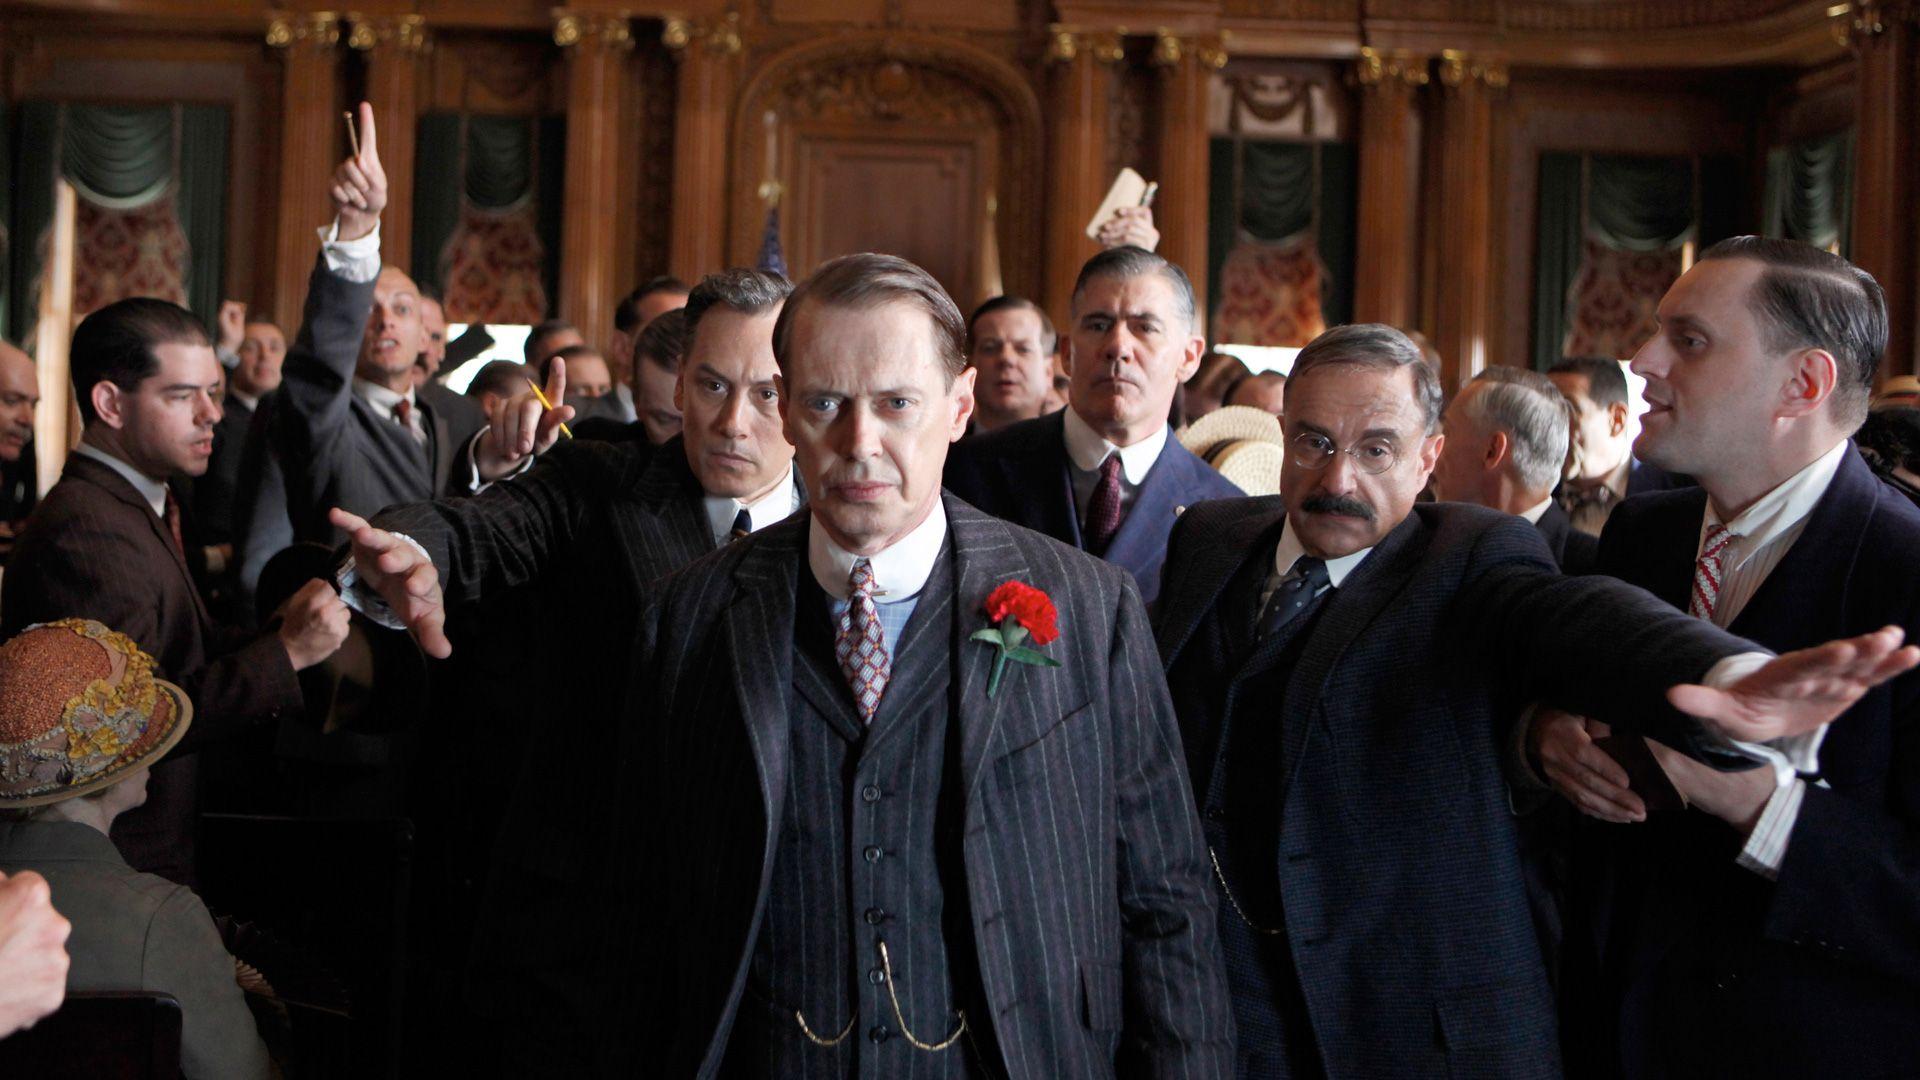 HBO: Boardwalk Empire S 2 EP 24: To the Lost